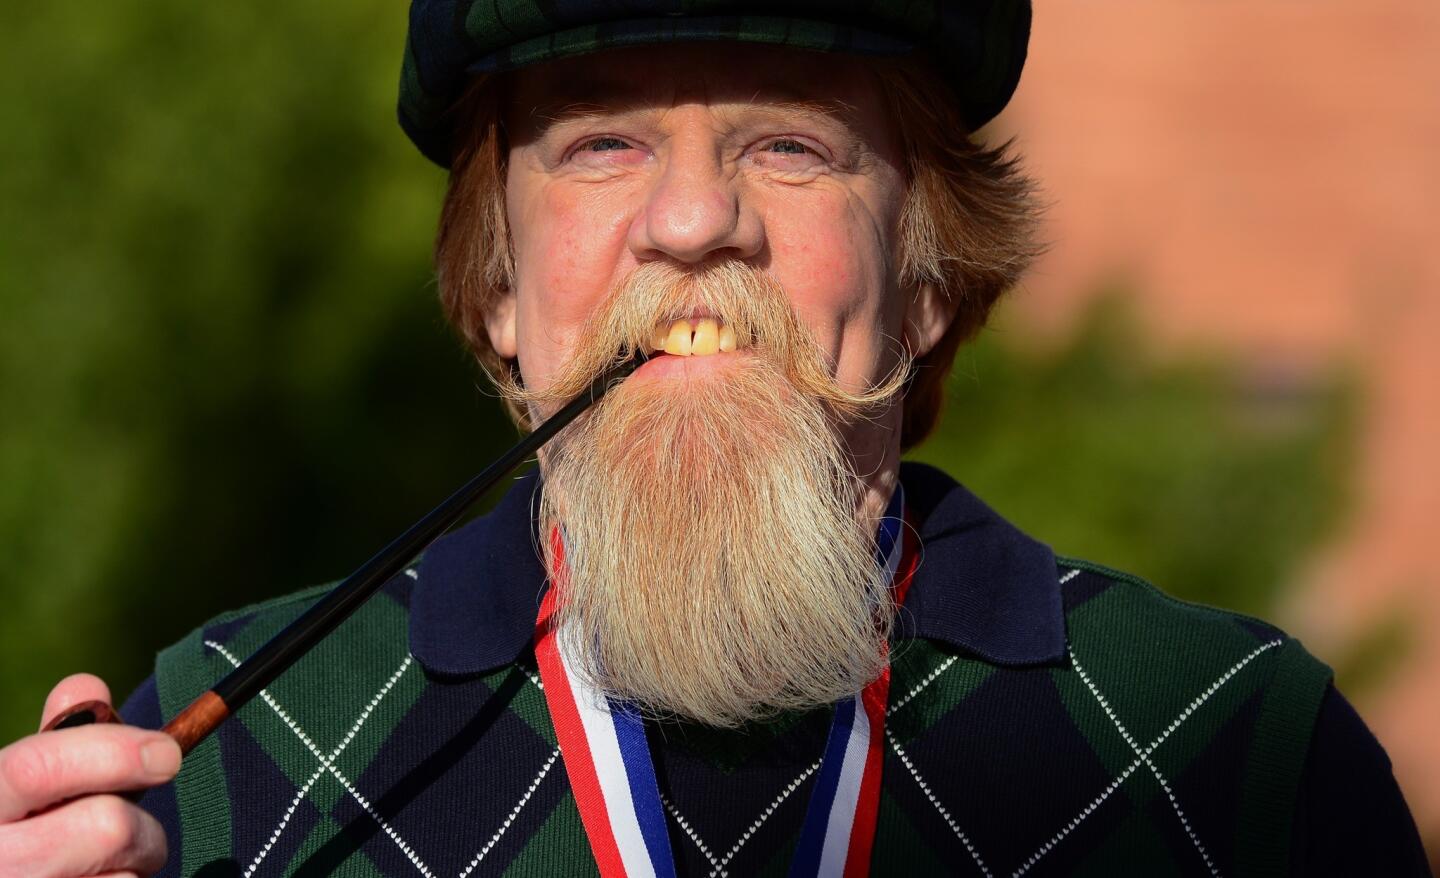 The British Beard and Moustache Championships 2012 - The Winners